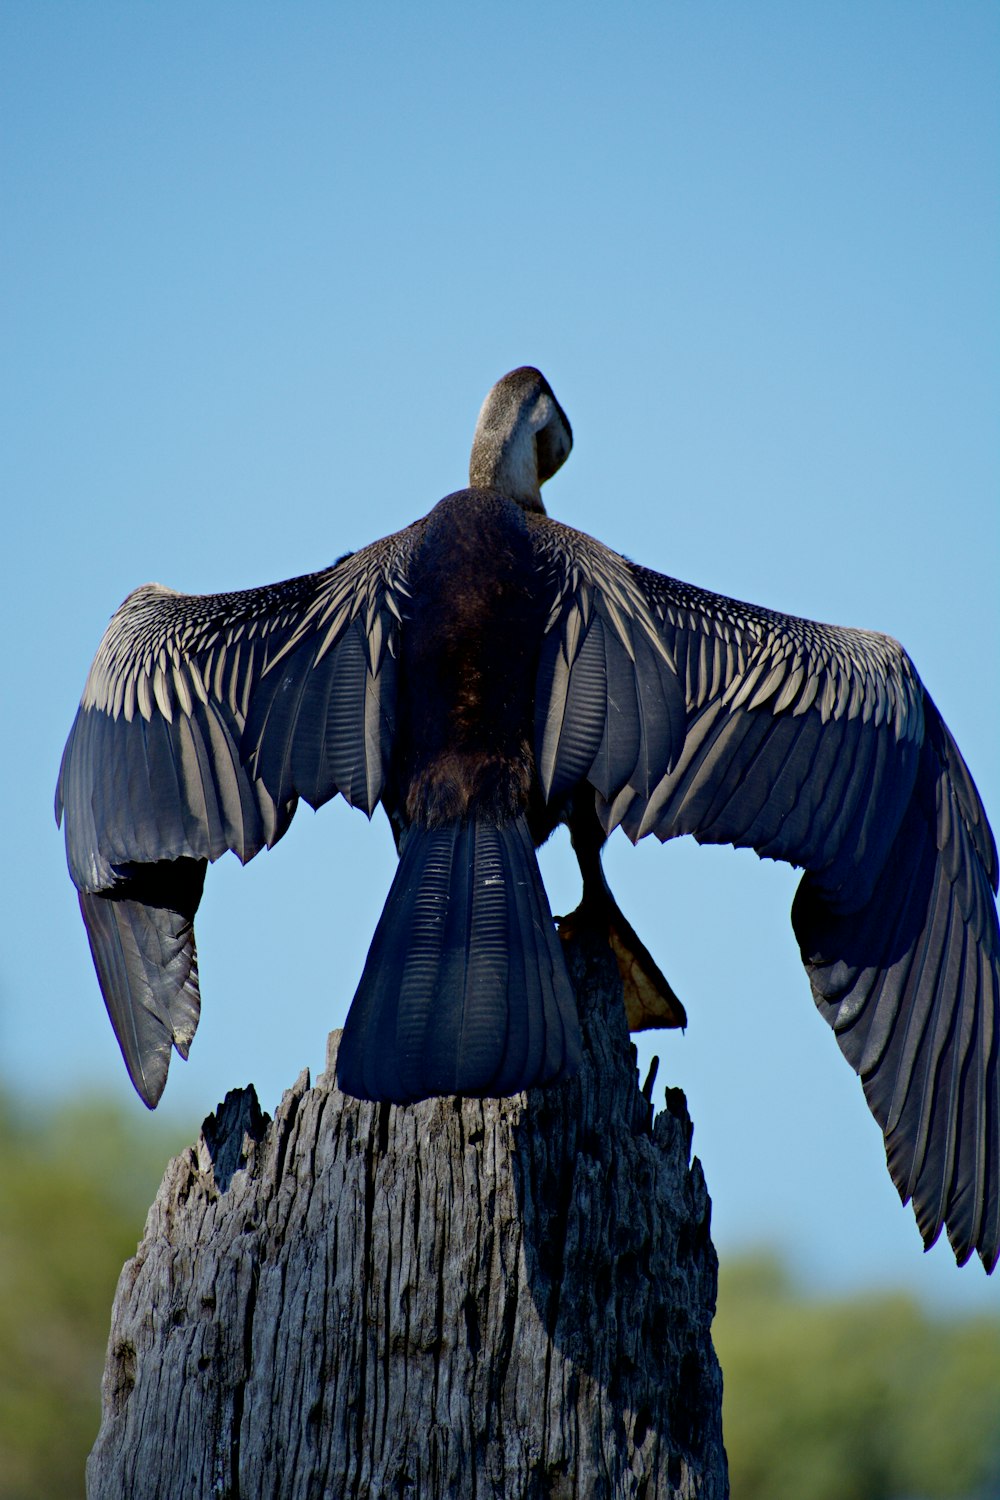 a bird with its wings spread sitting on top of a tree stump